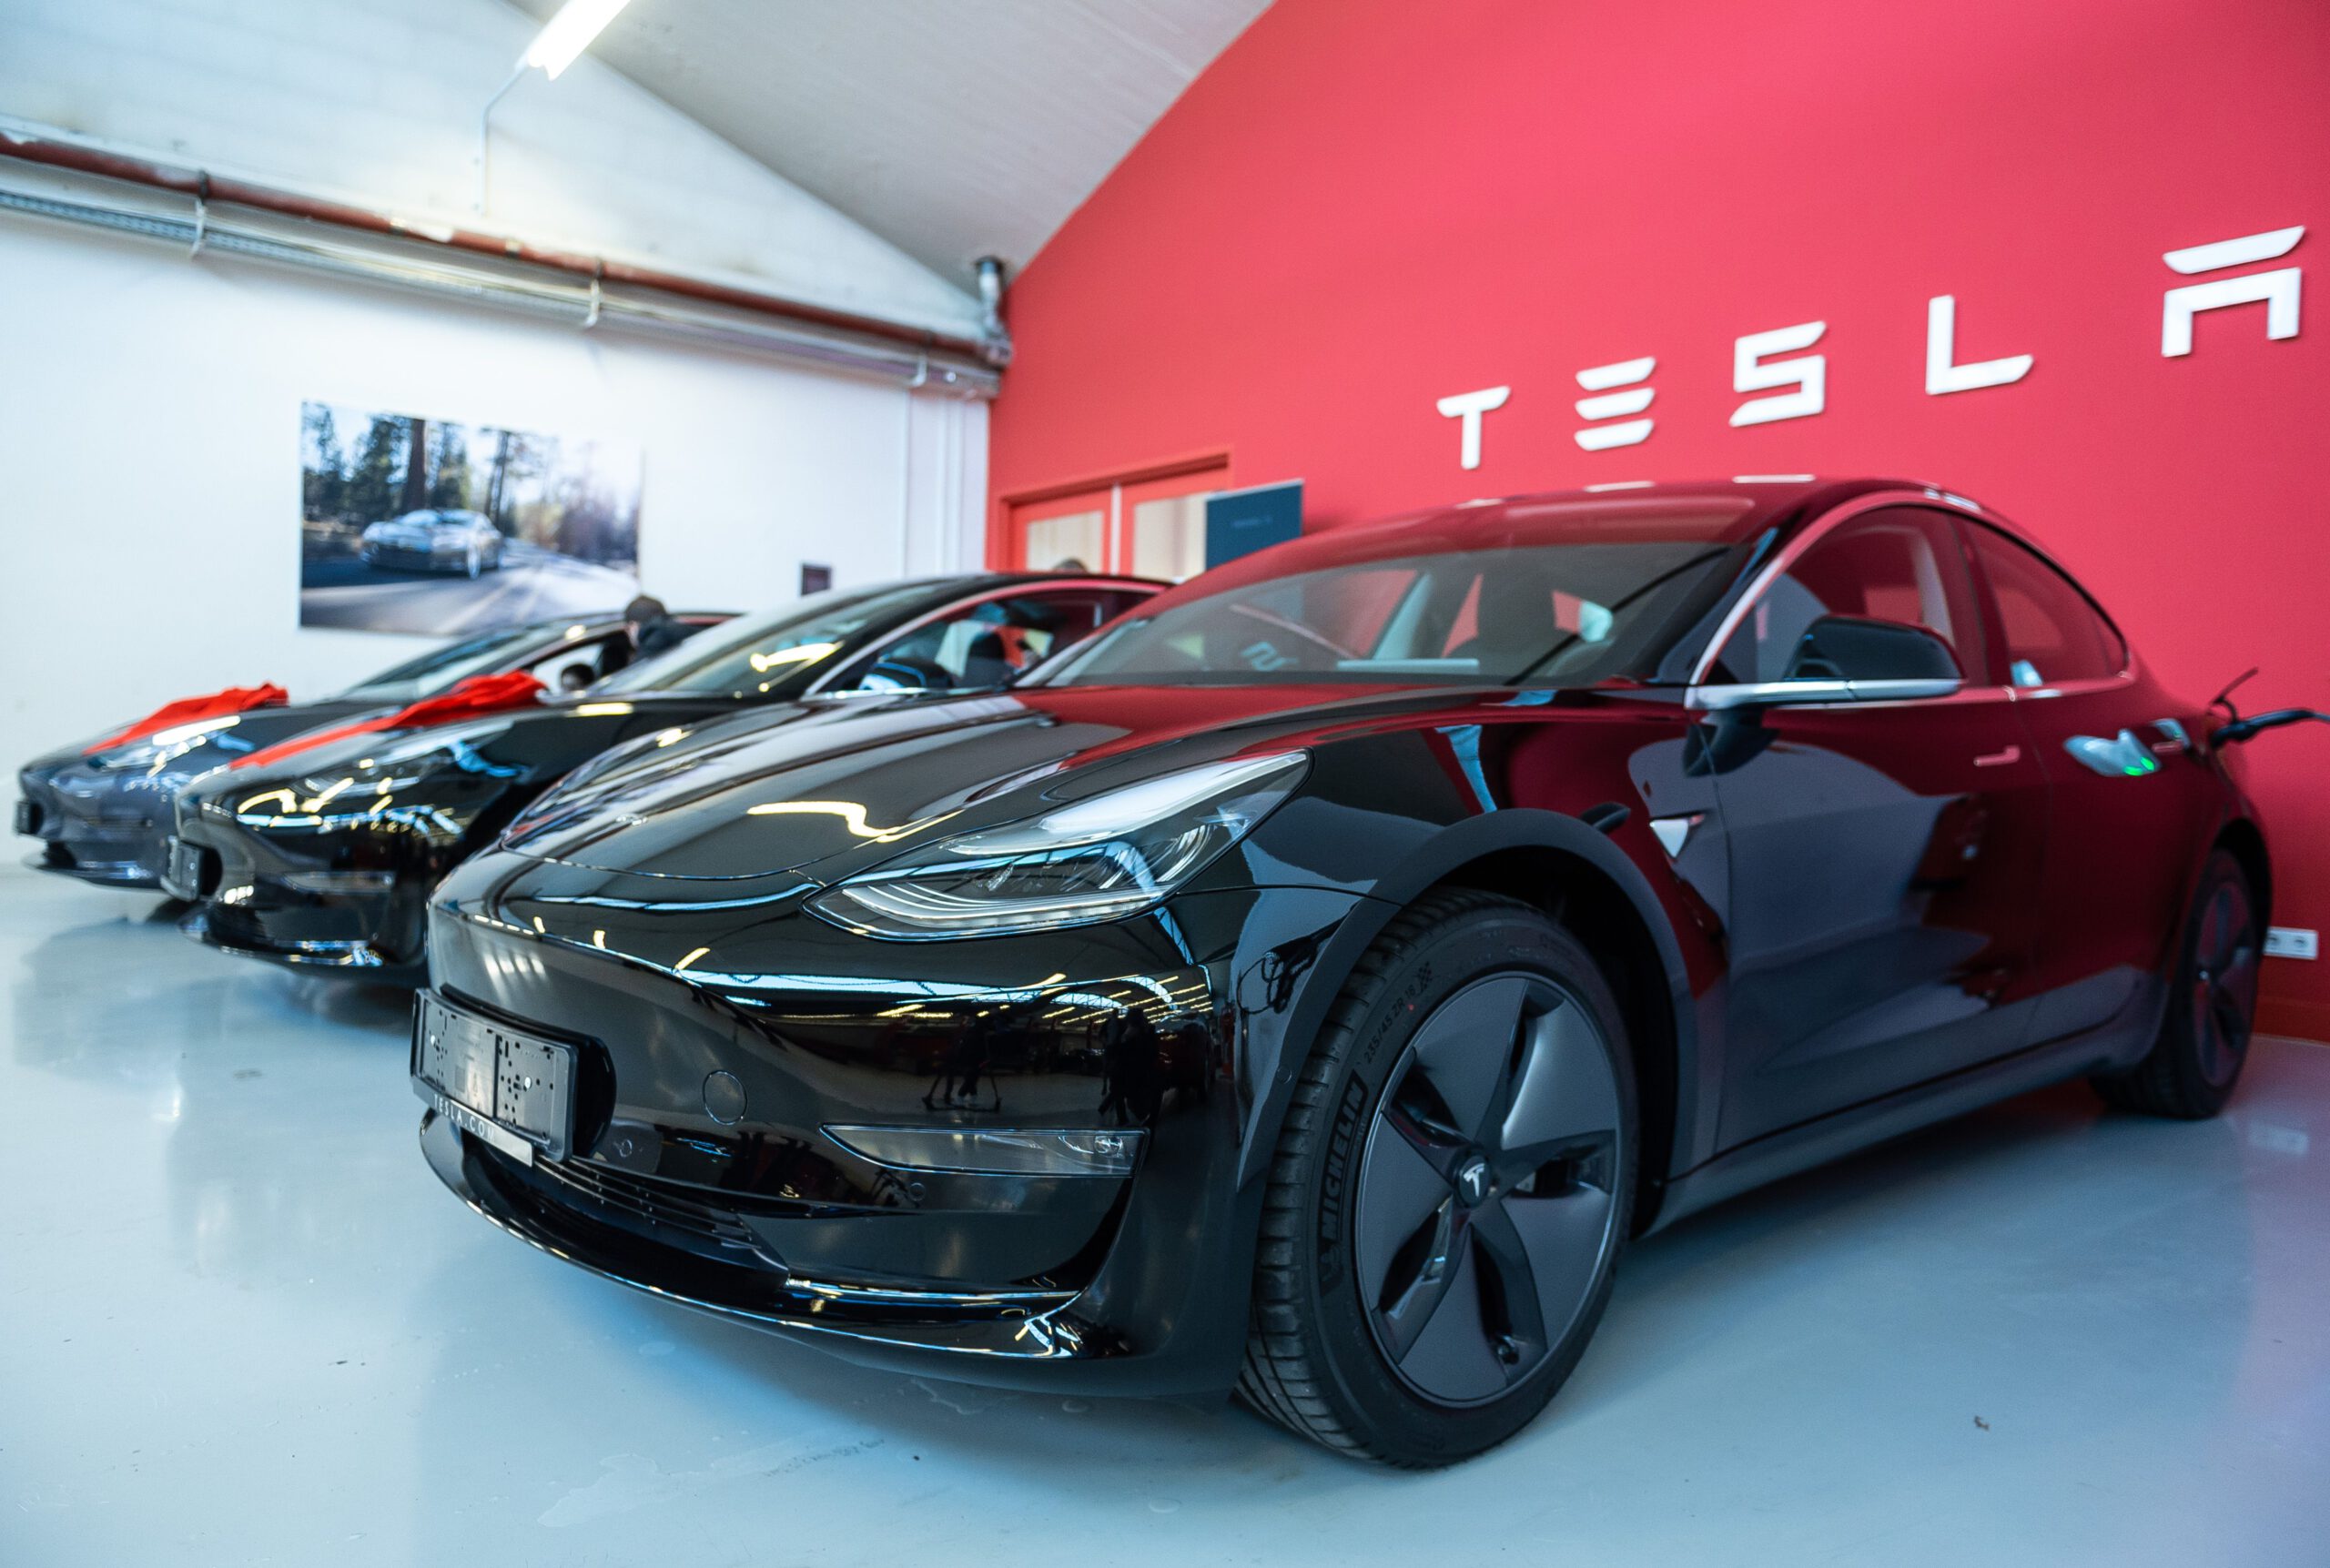 Tesla Q2 2019 production and delivery numbers